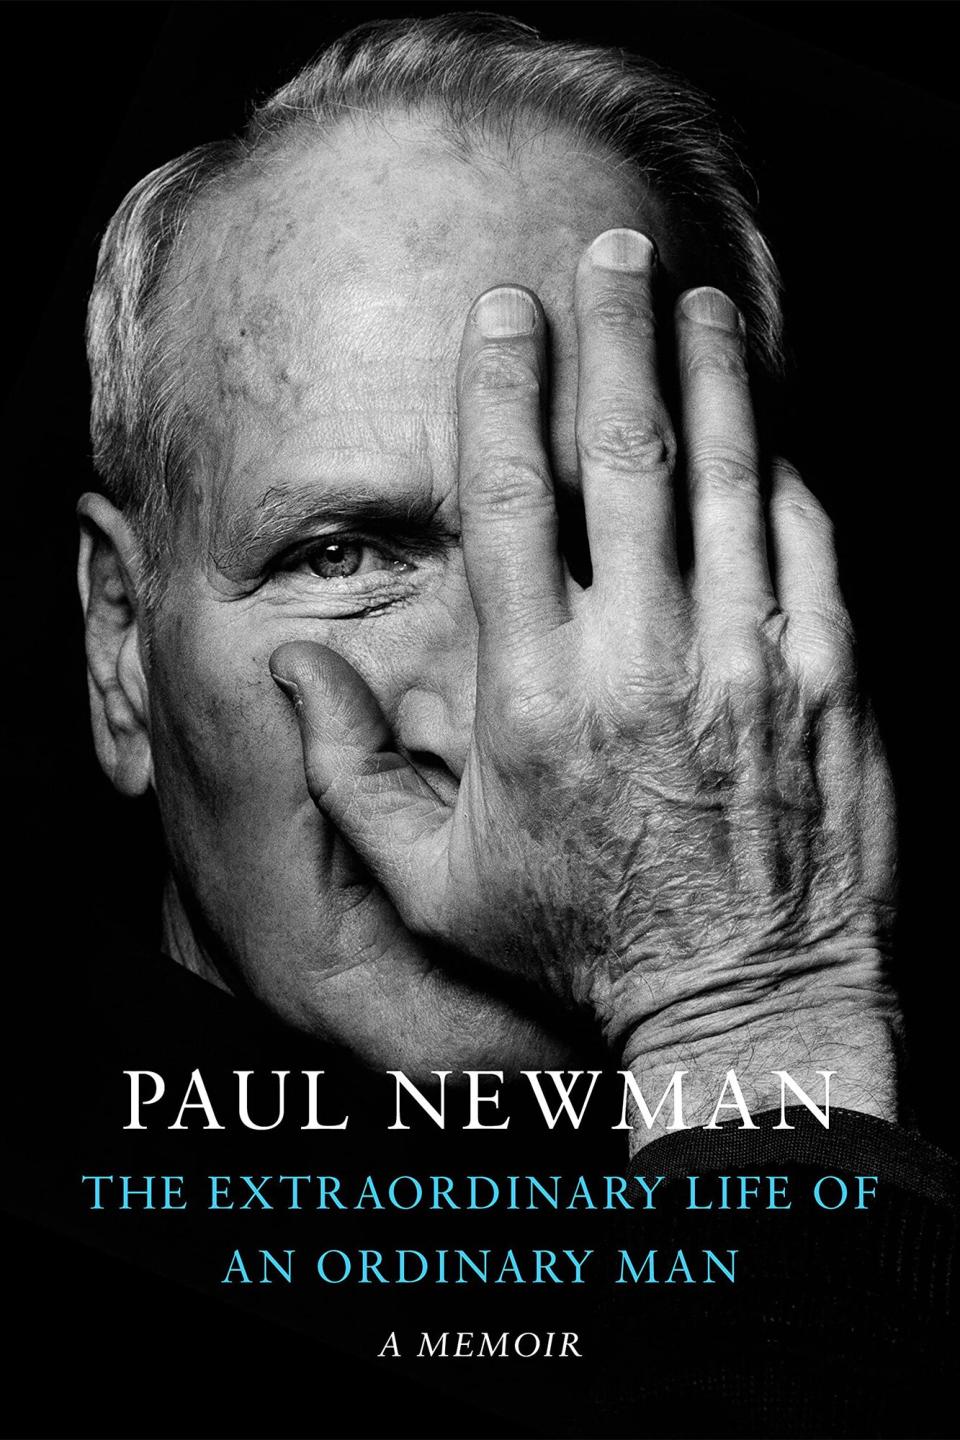 The Extraordinary Life of an Ordinary Man: A Memoir The Extraordinary Life of an Ordinary Man: A Memoir by Paul Newman